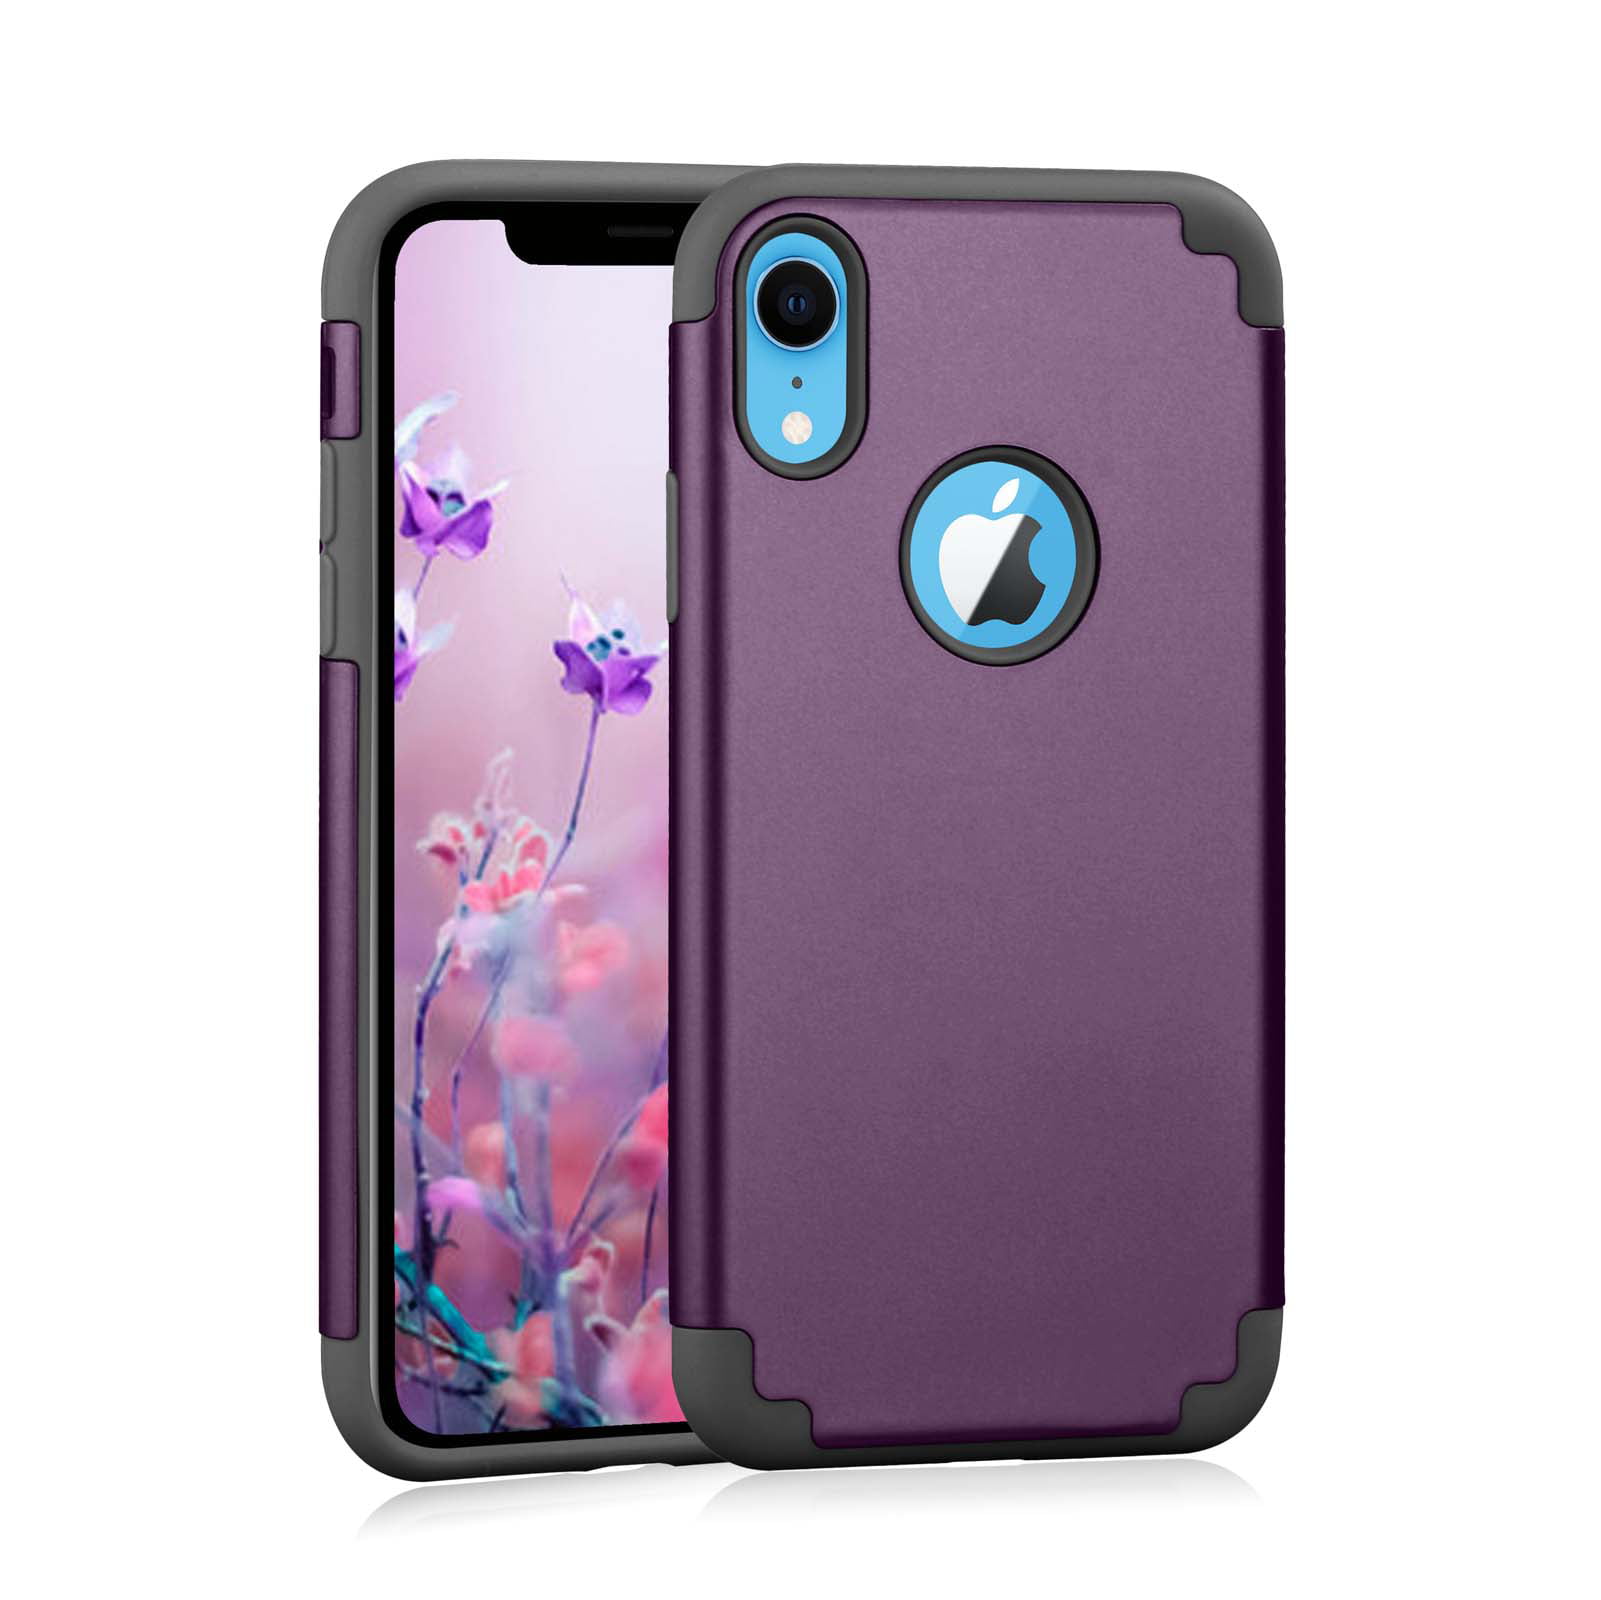 iPhone XR Cases, Case Cover for iPhone XR 6.1", Njjex ...